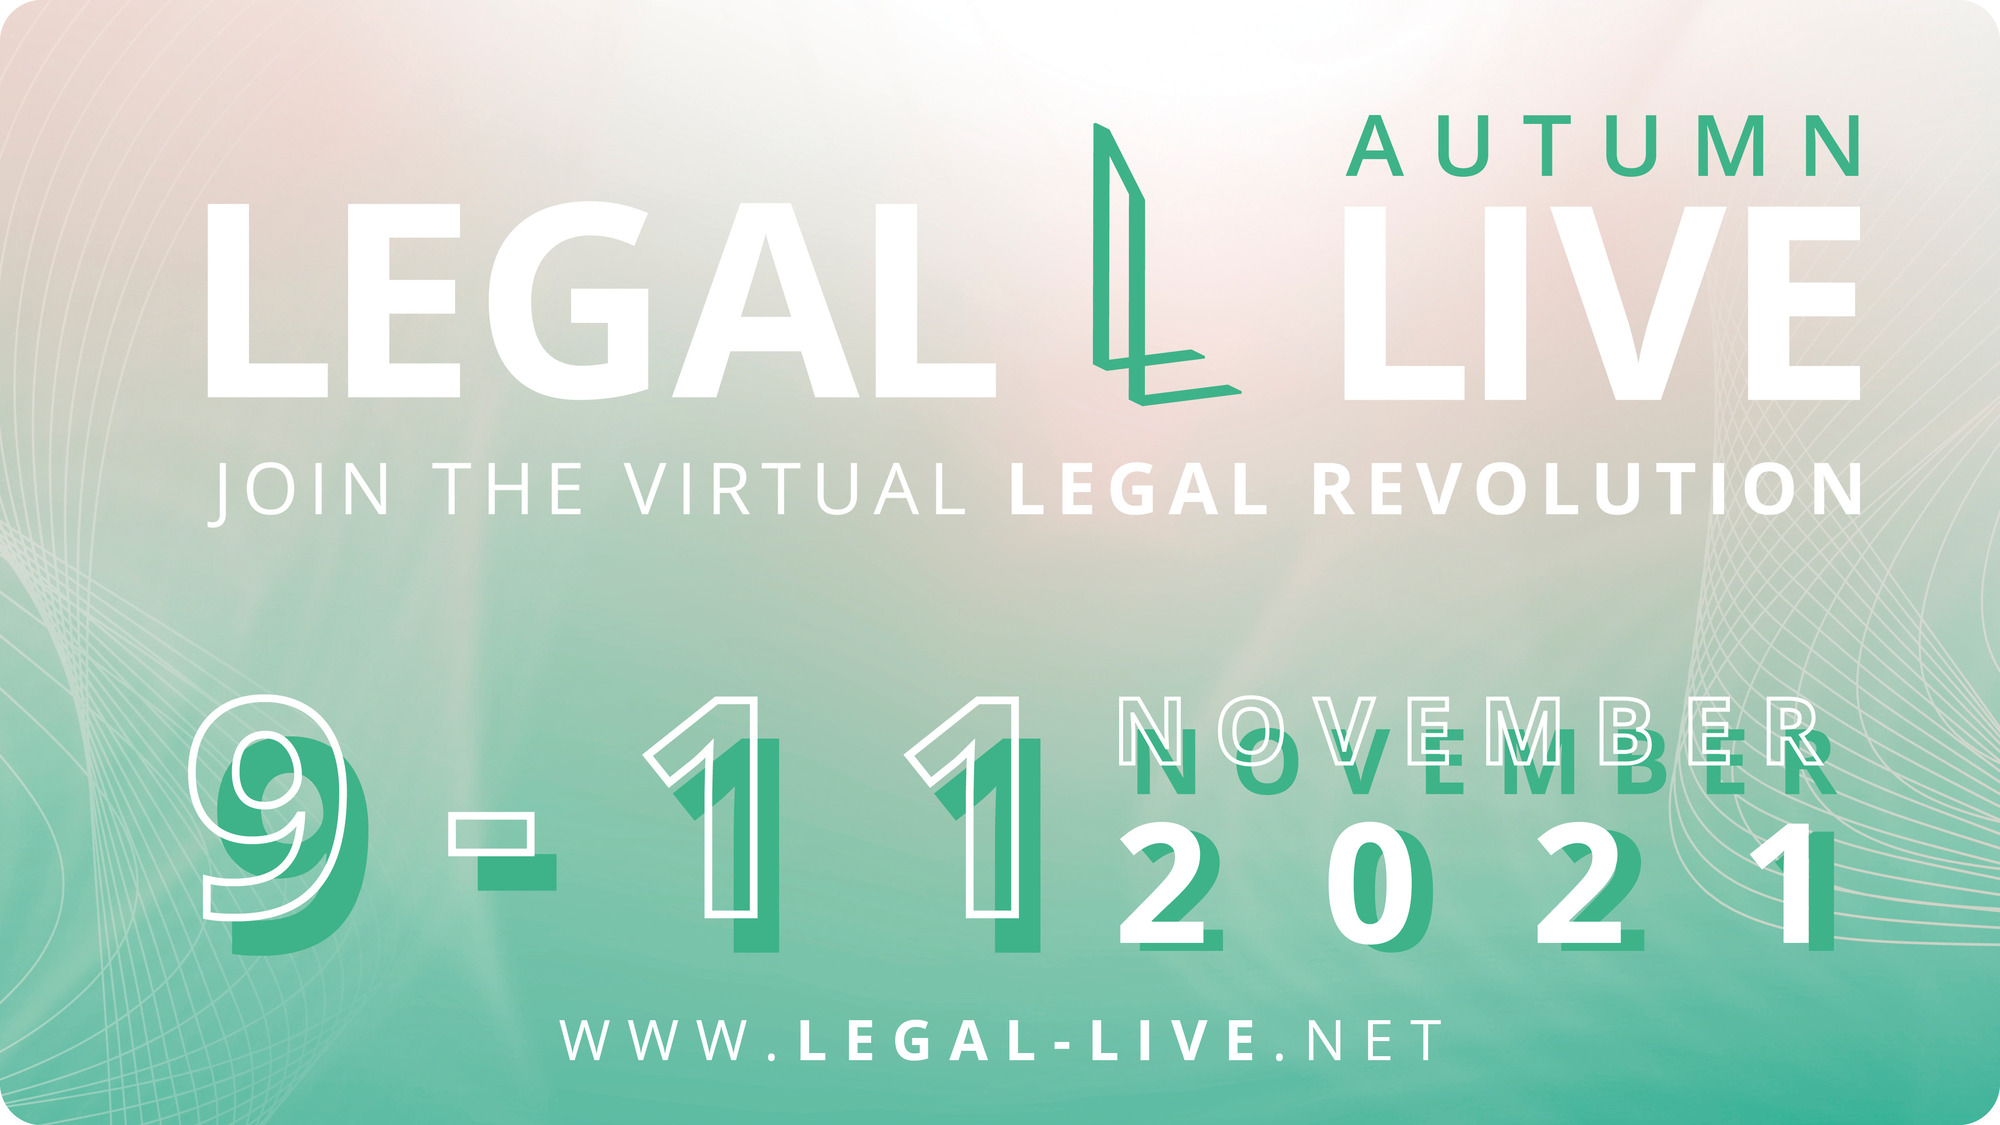 LEGAL LIVE Autumn Conference Will Take Place from November 9 to 11